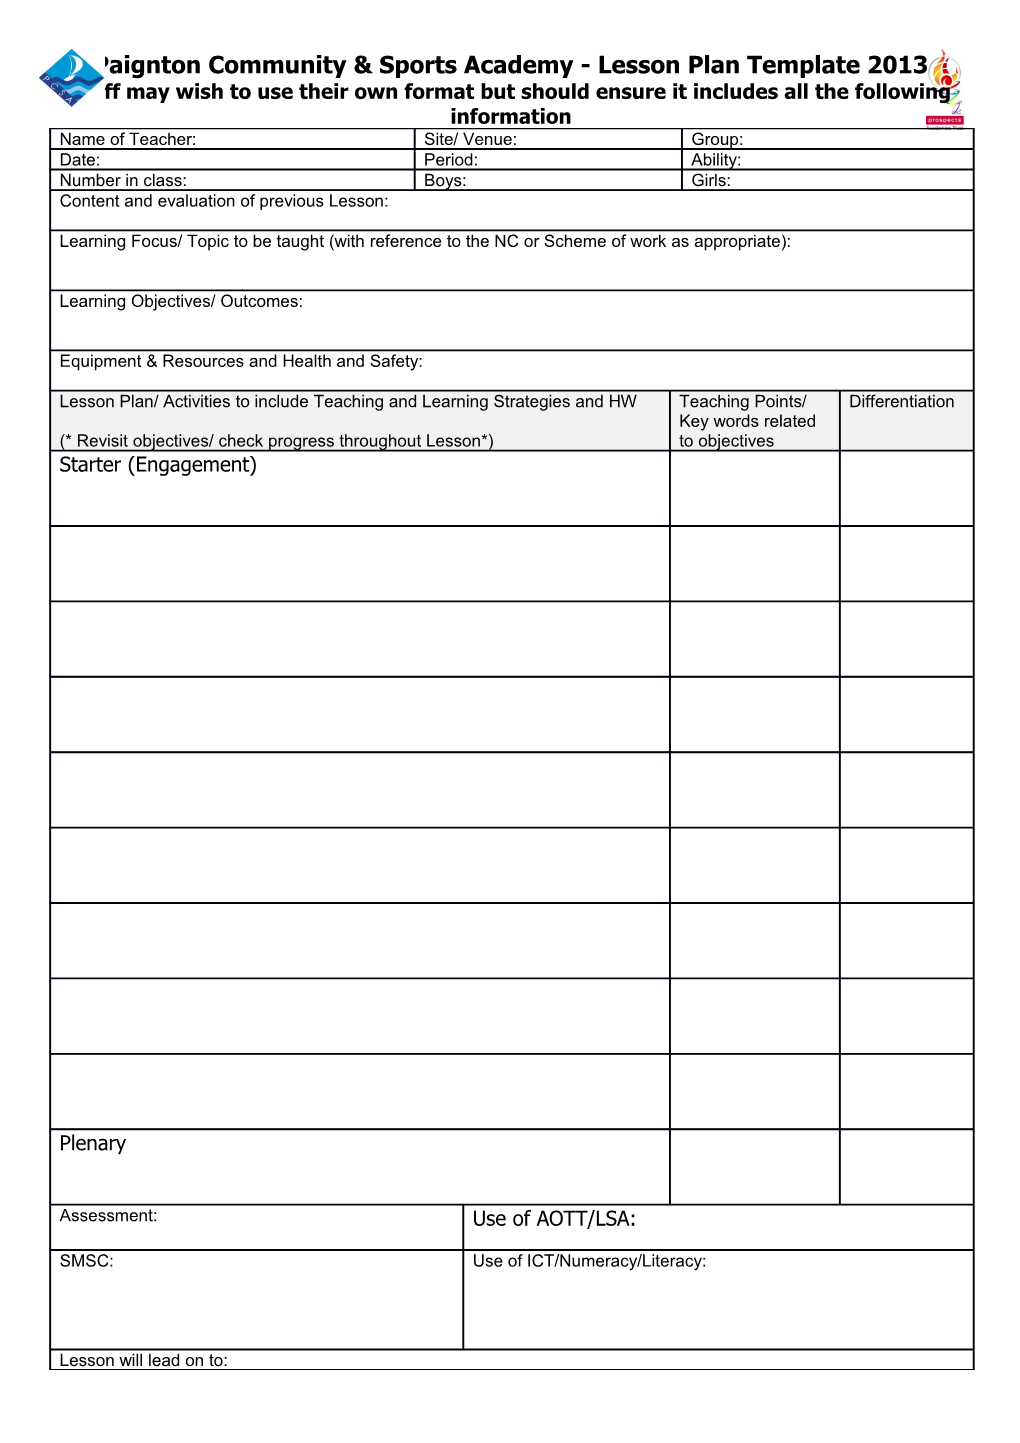 MPN Sheet to Be Attached to the Lesson Plan